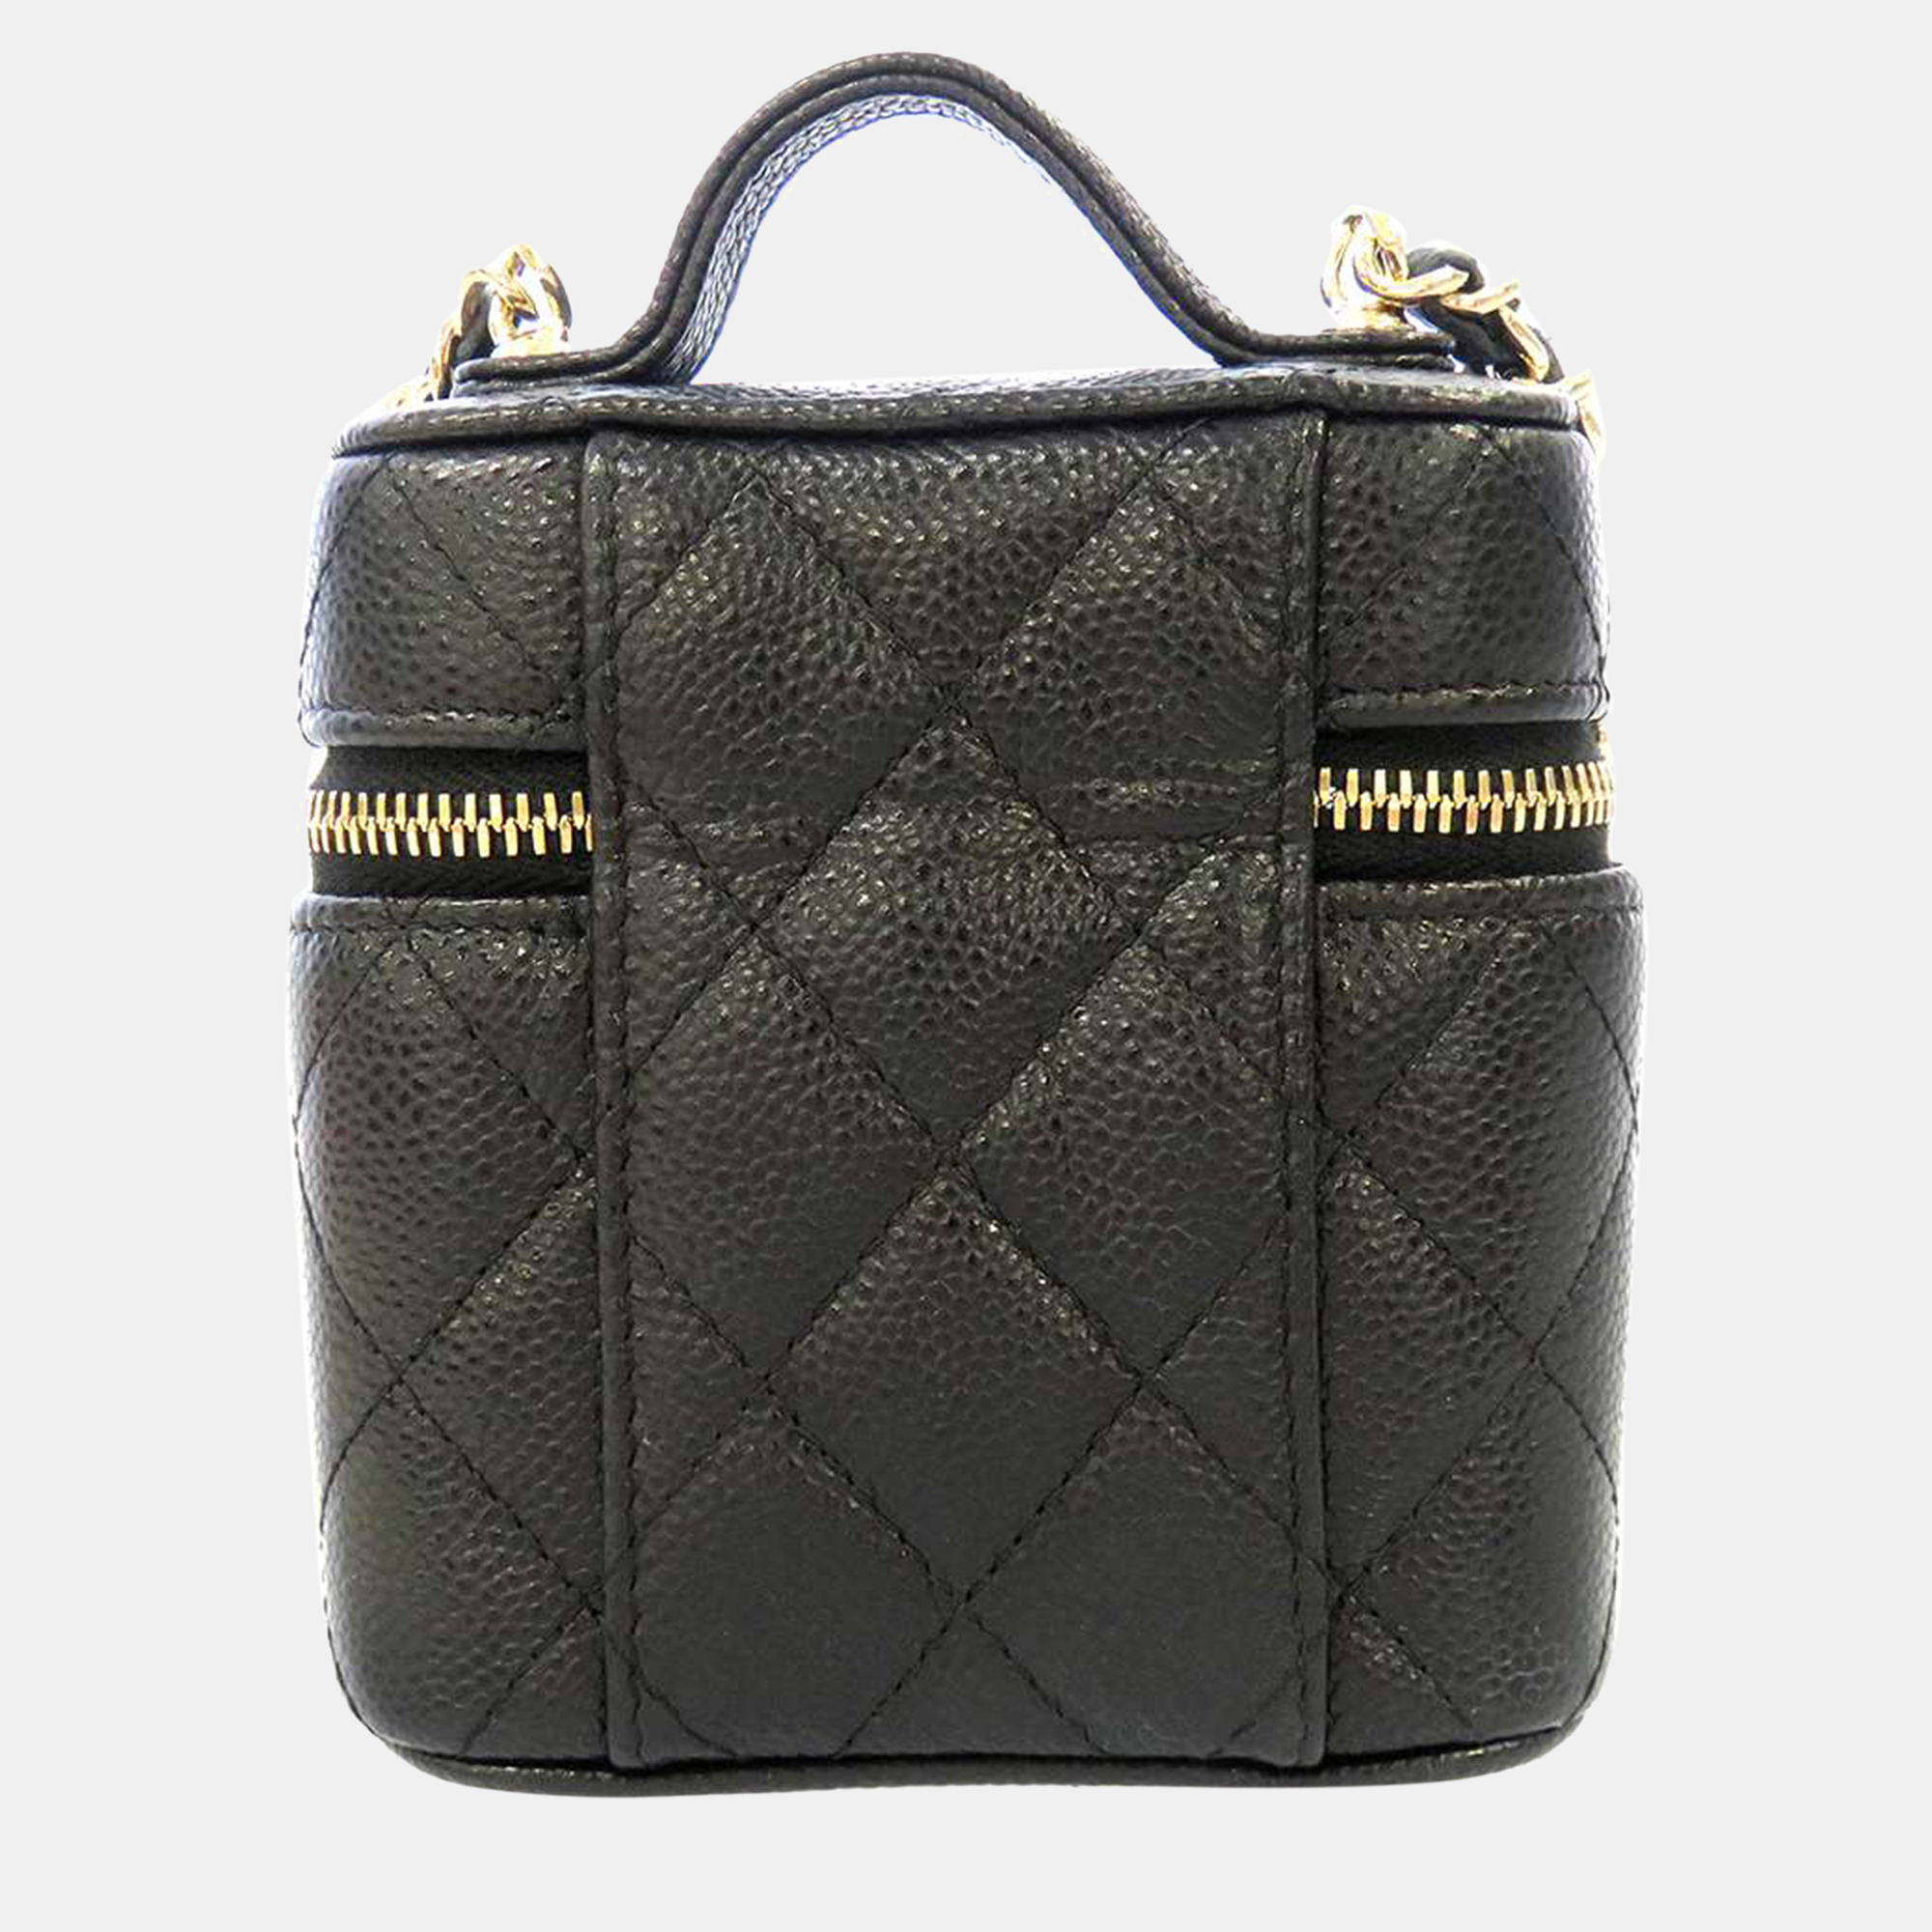 Chanel Black Leather Small Vanity Case